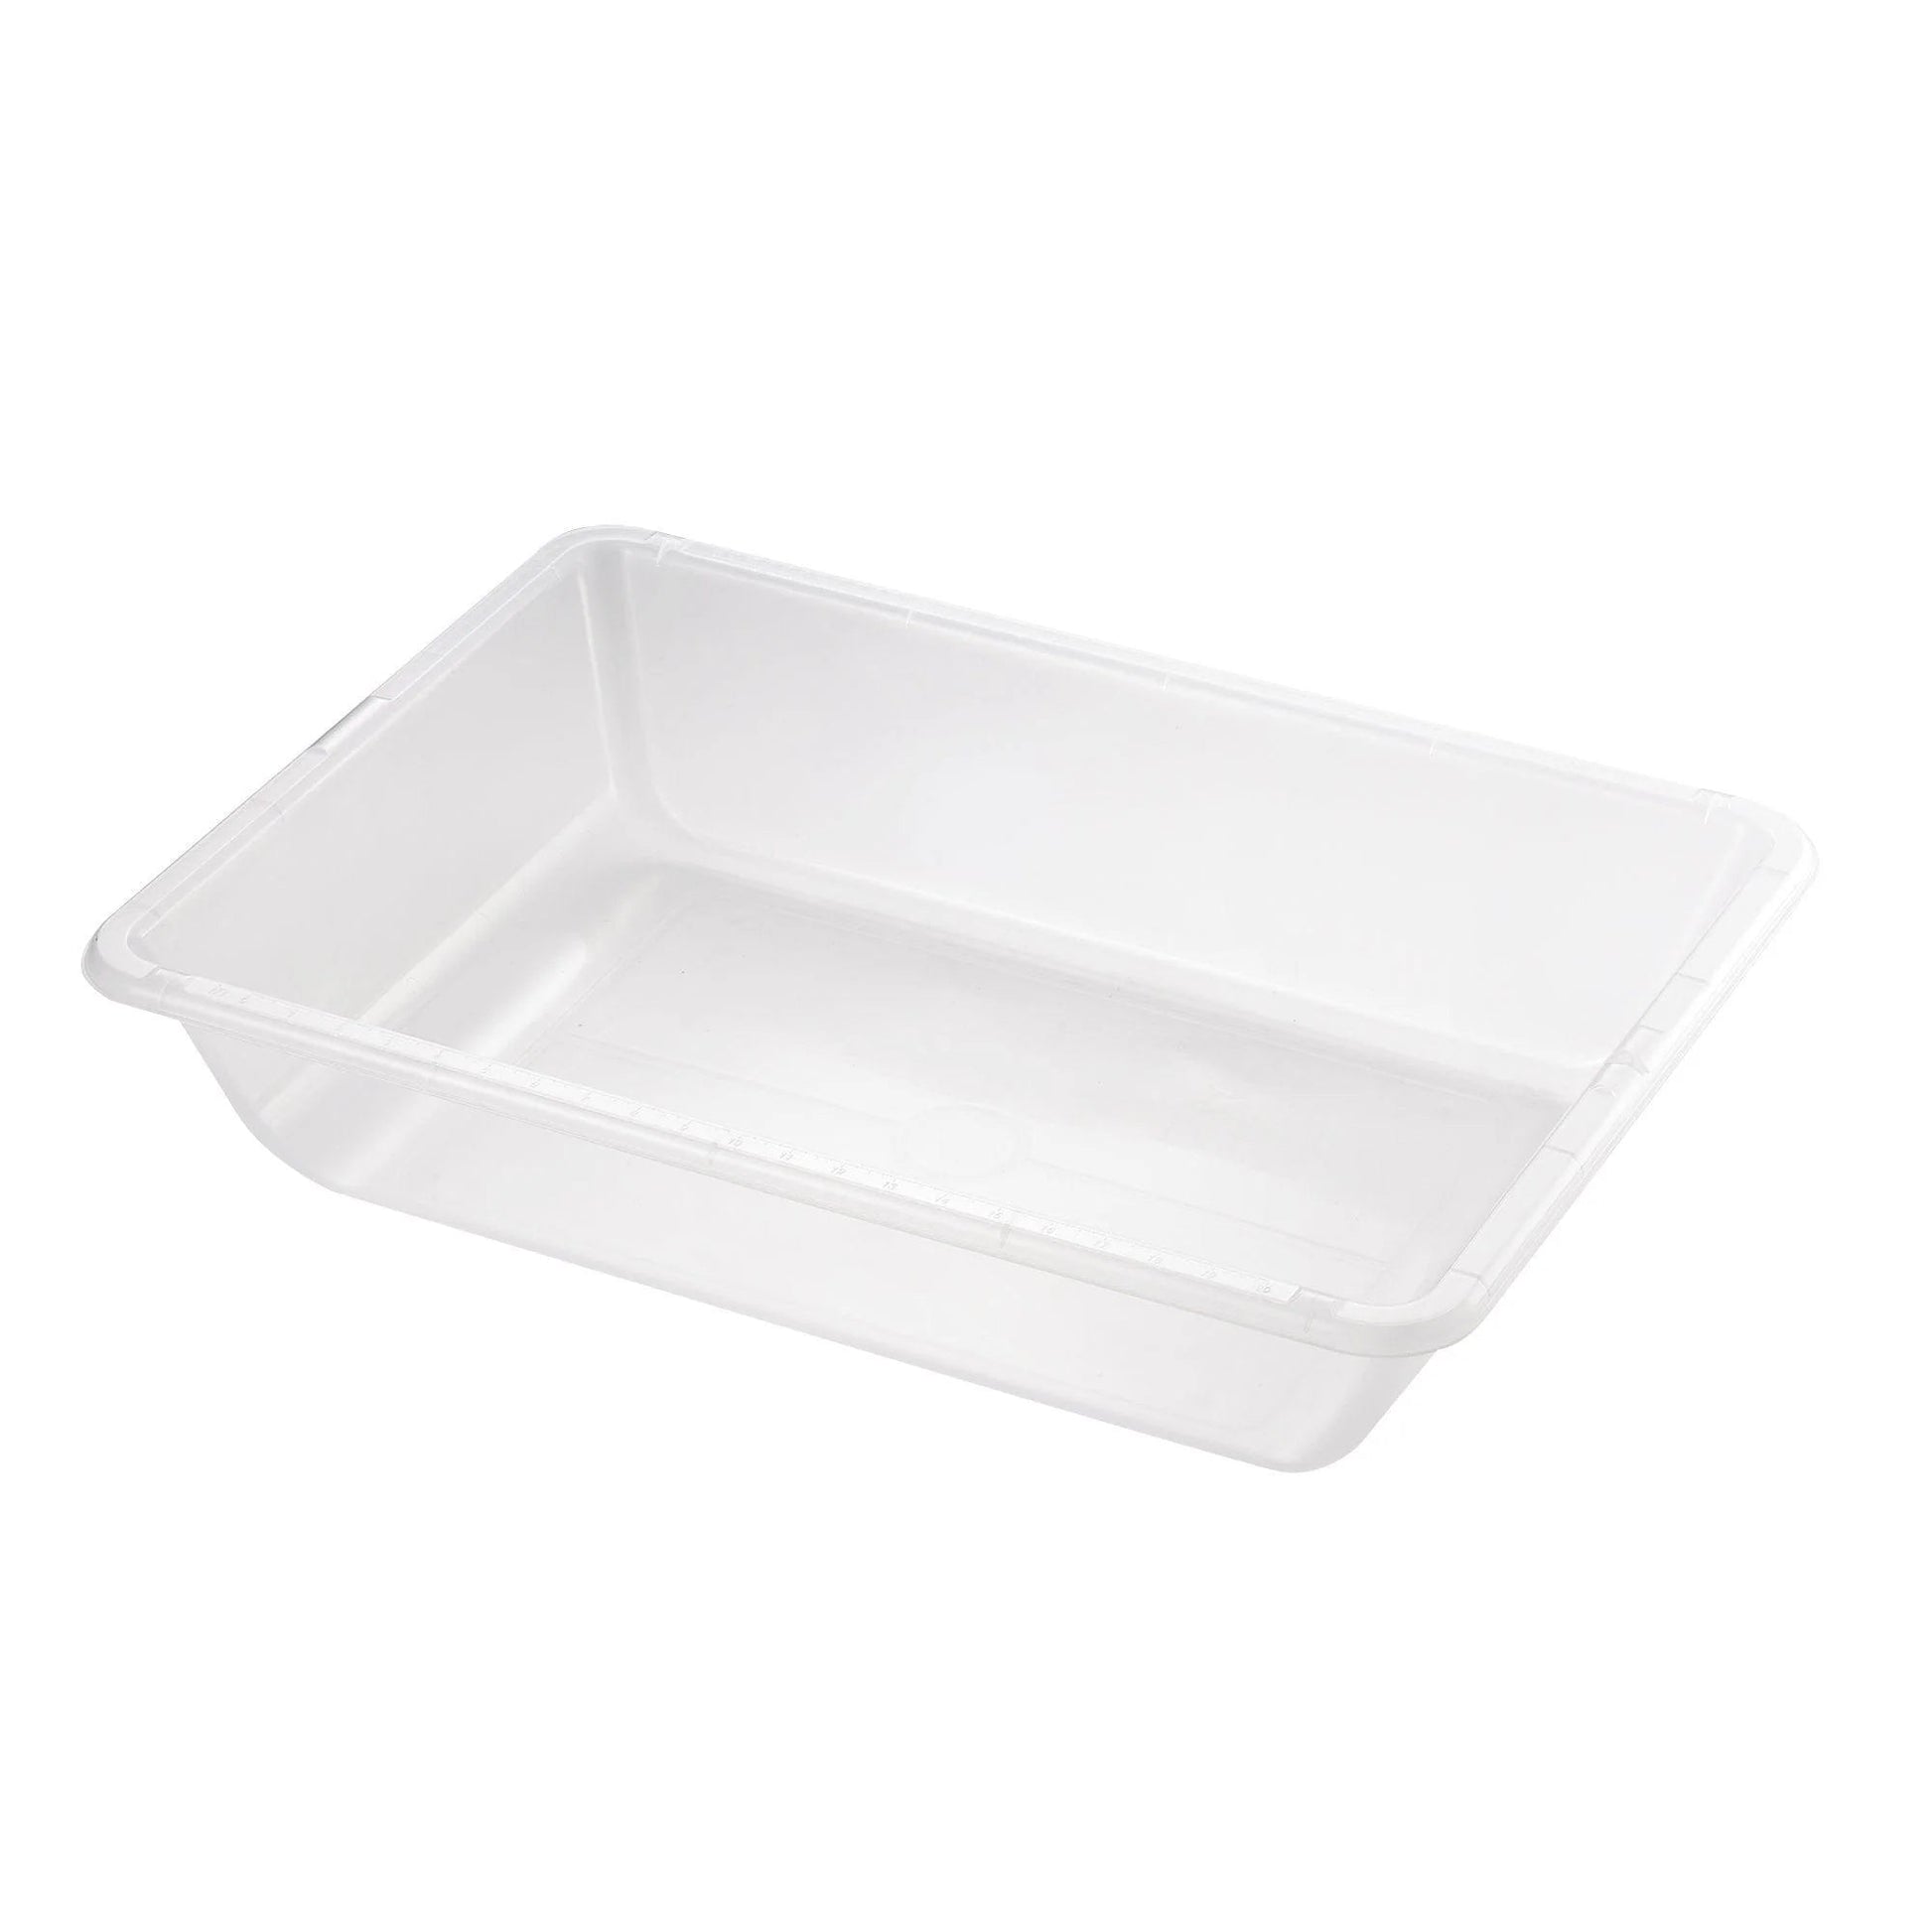 Edx Education - Desk Top Water Tray - Translucent - Playlaan